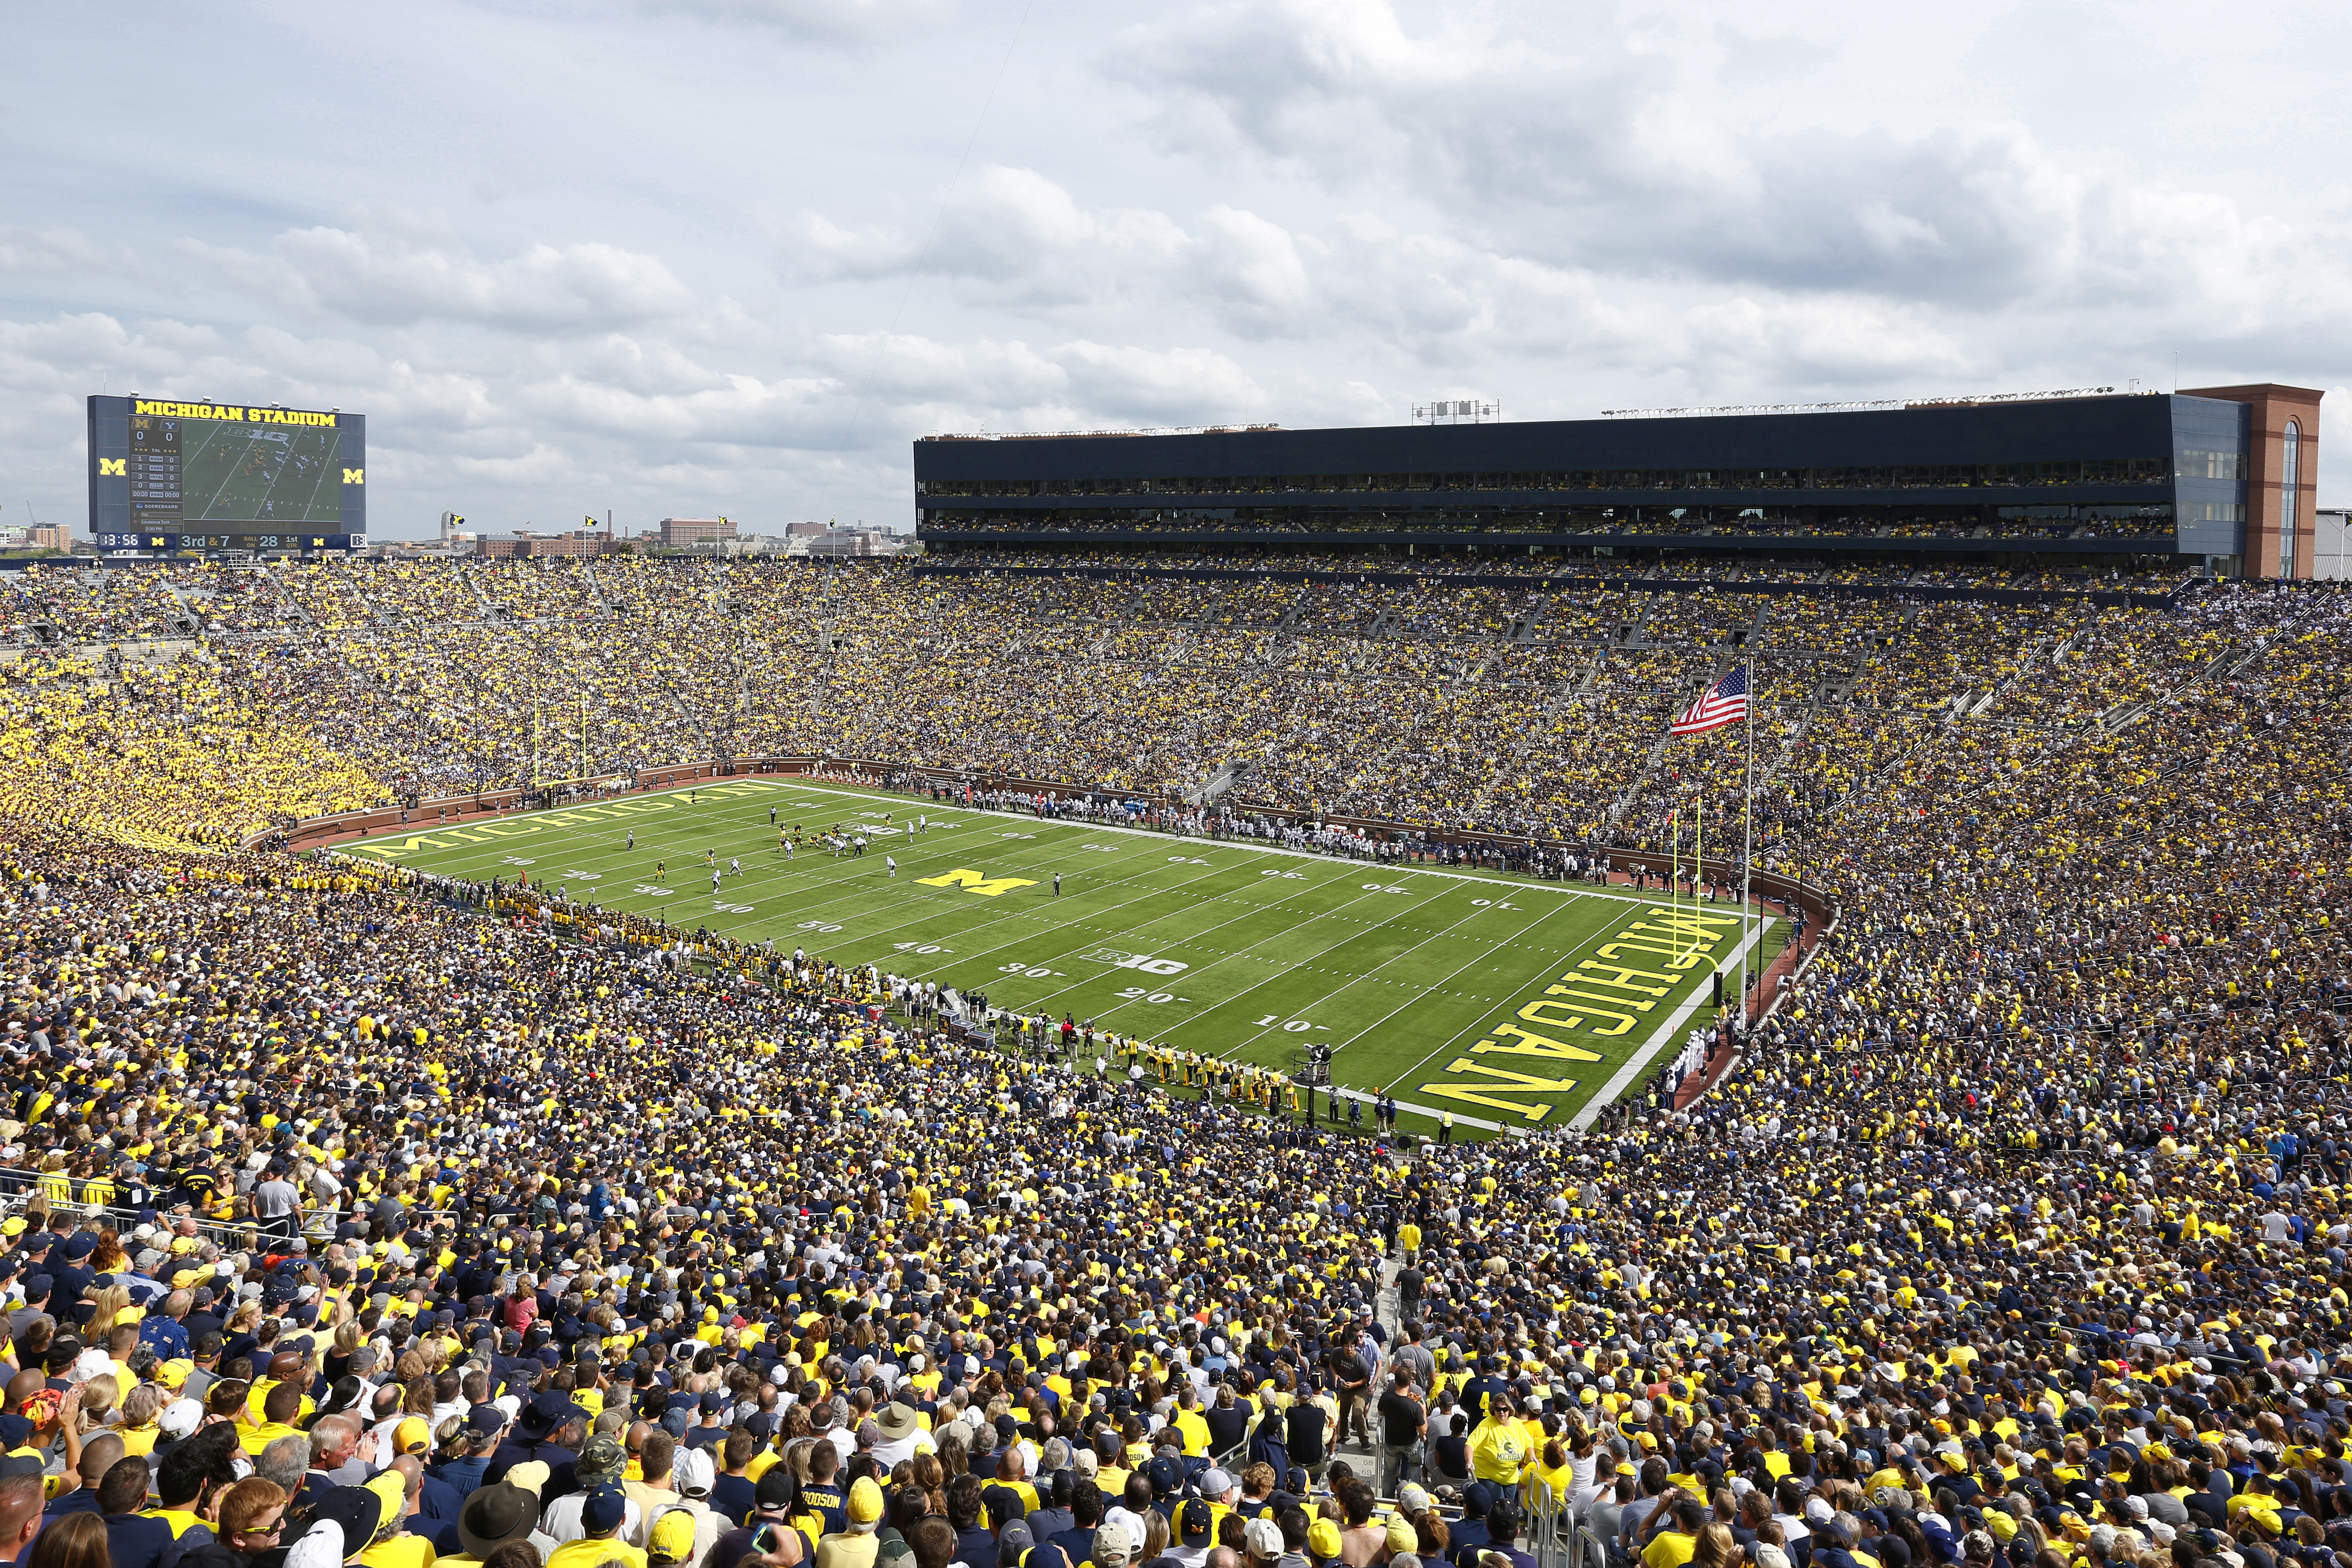 General view of the stadium from the upper level as the Michigan Wolverines play against the BYU Cougars at Michigan Stadium in Ann Arbor, Mich. on Sept. 26, 2015.